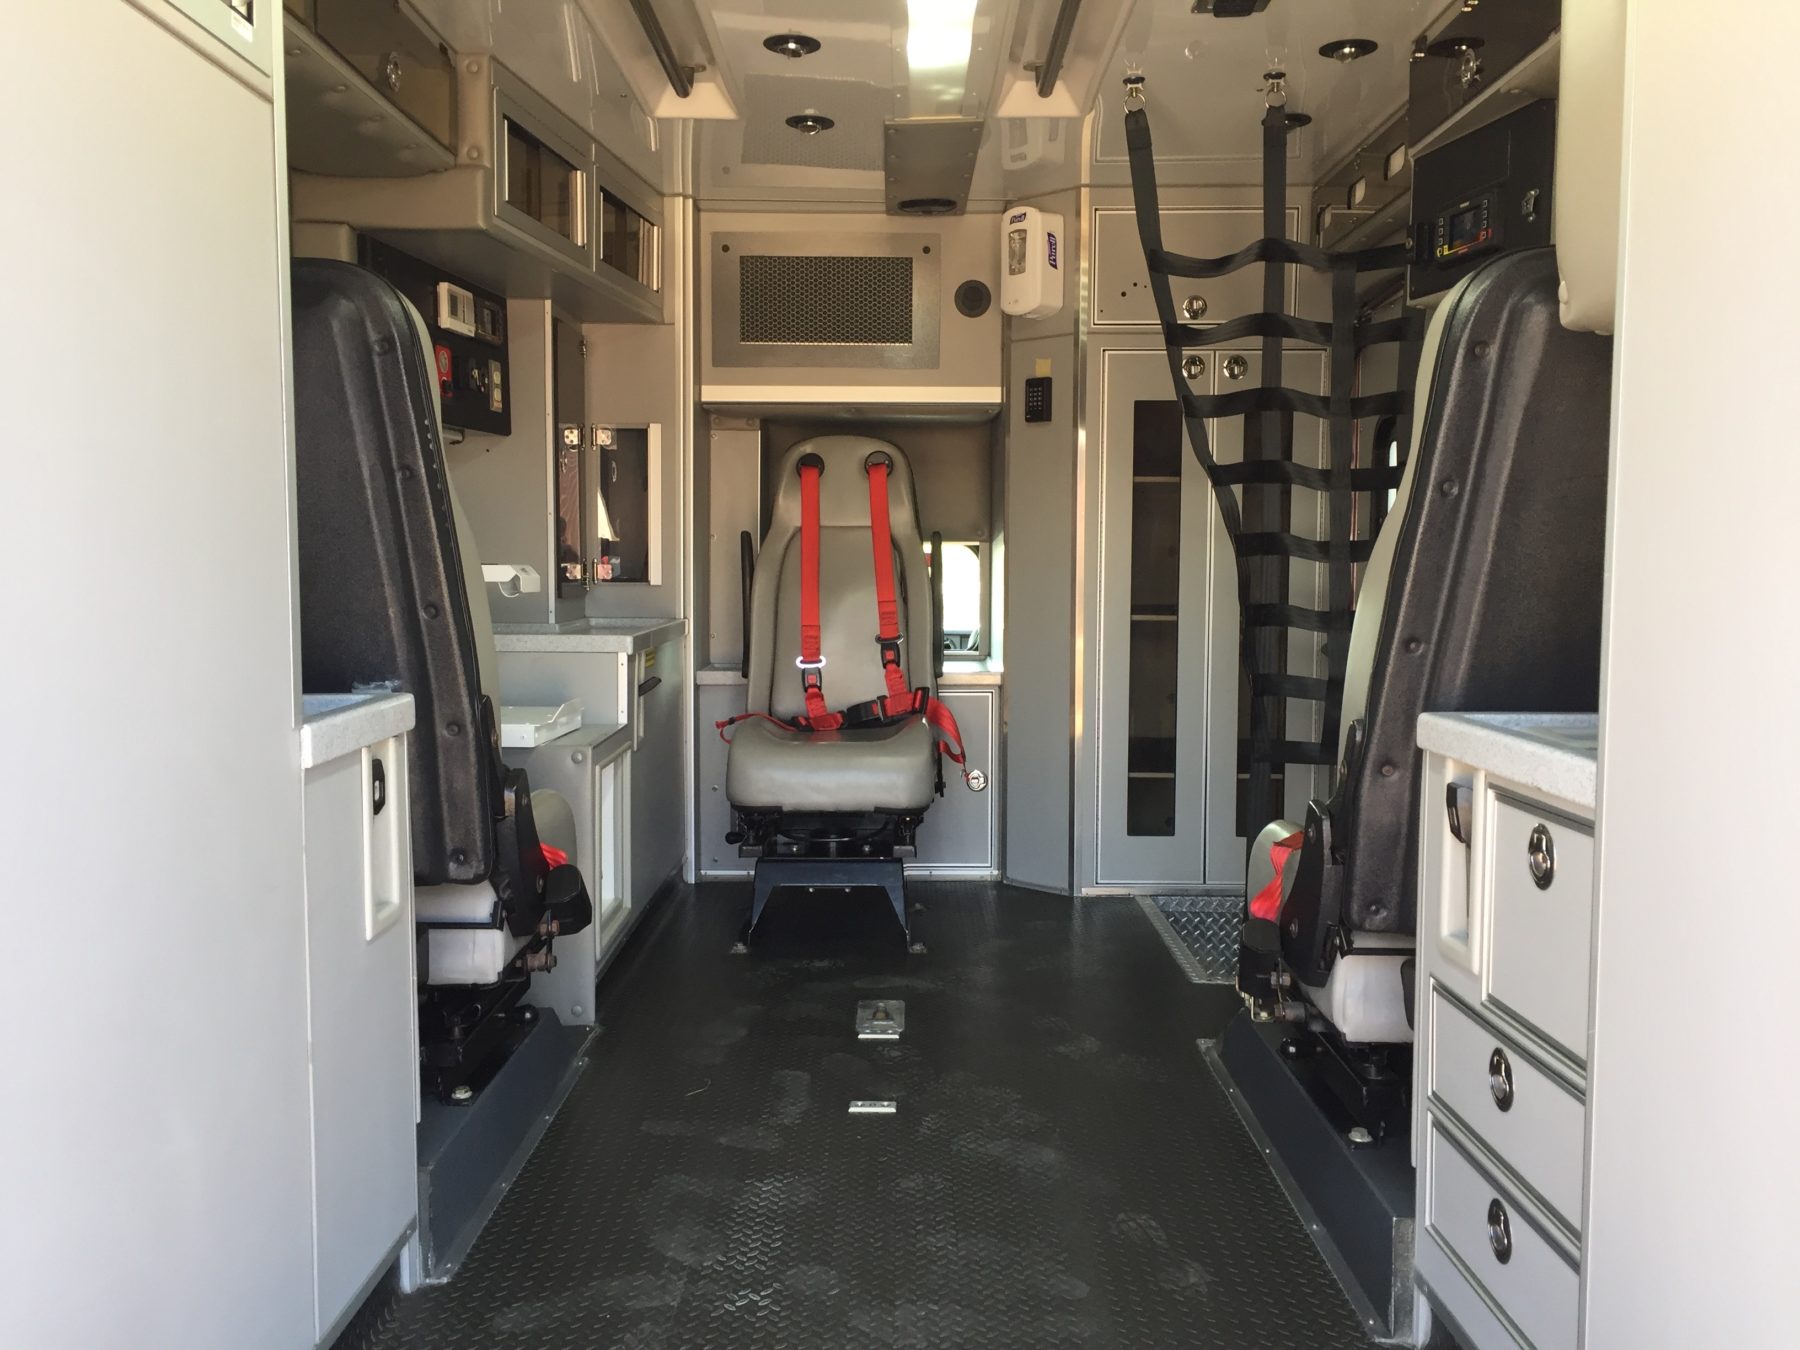 2012 Ford F550 4x4 Heavy Duty Ambulance For Sale – Picture 2